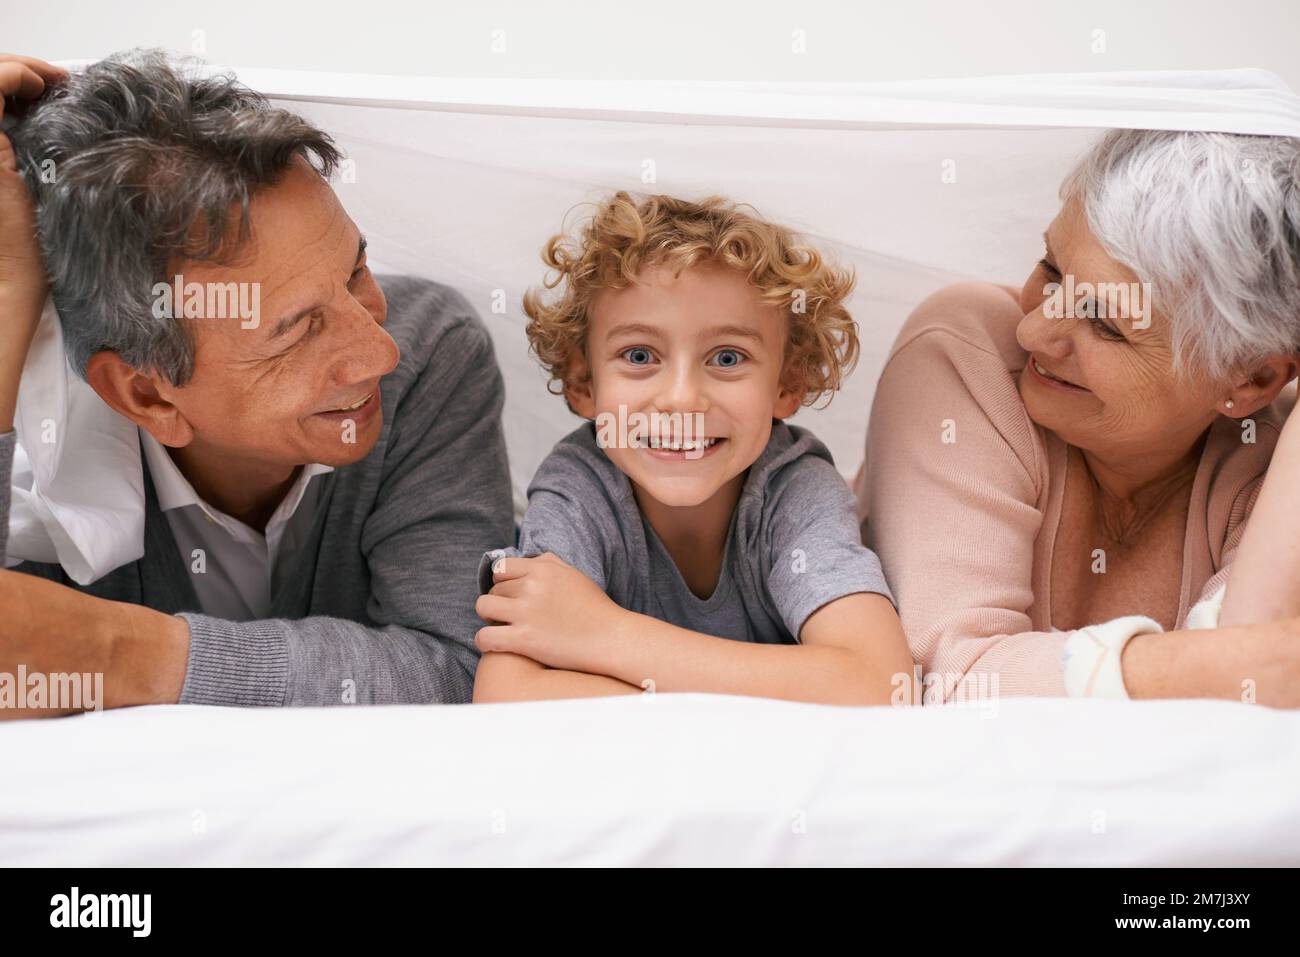 Undercover antics. A young boy having fun with his grandparents. Stock Photo